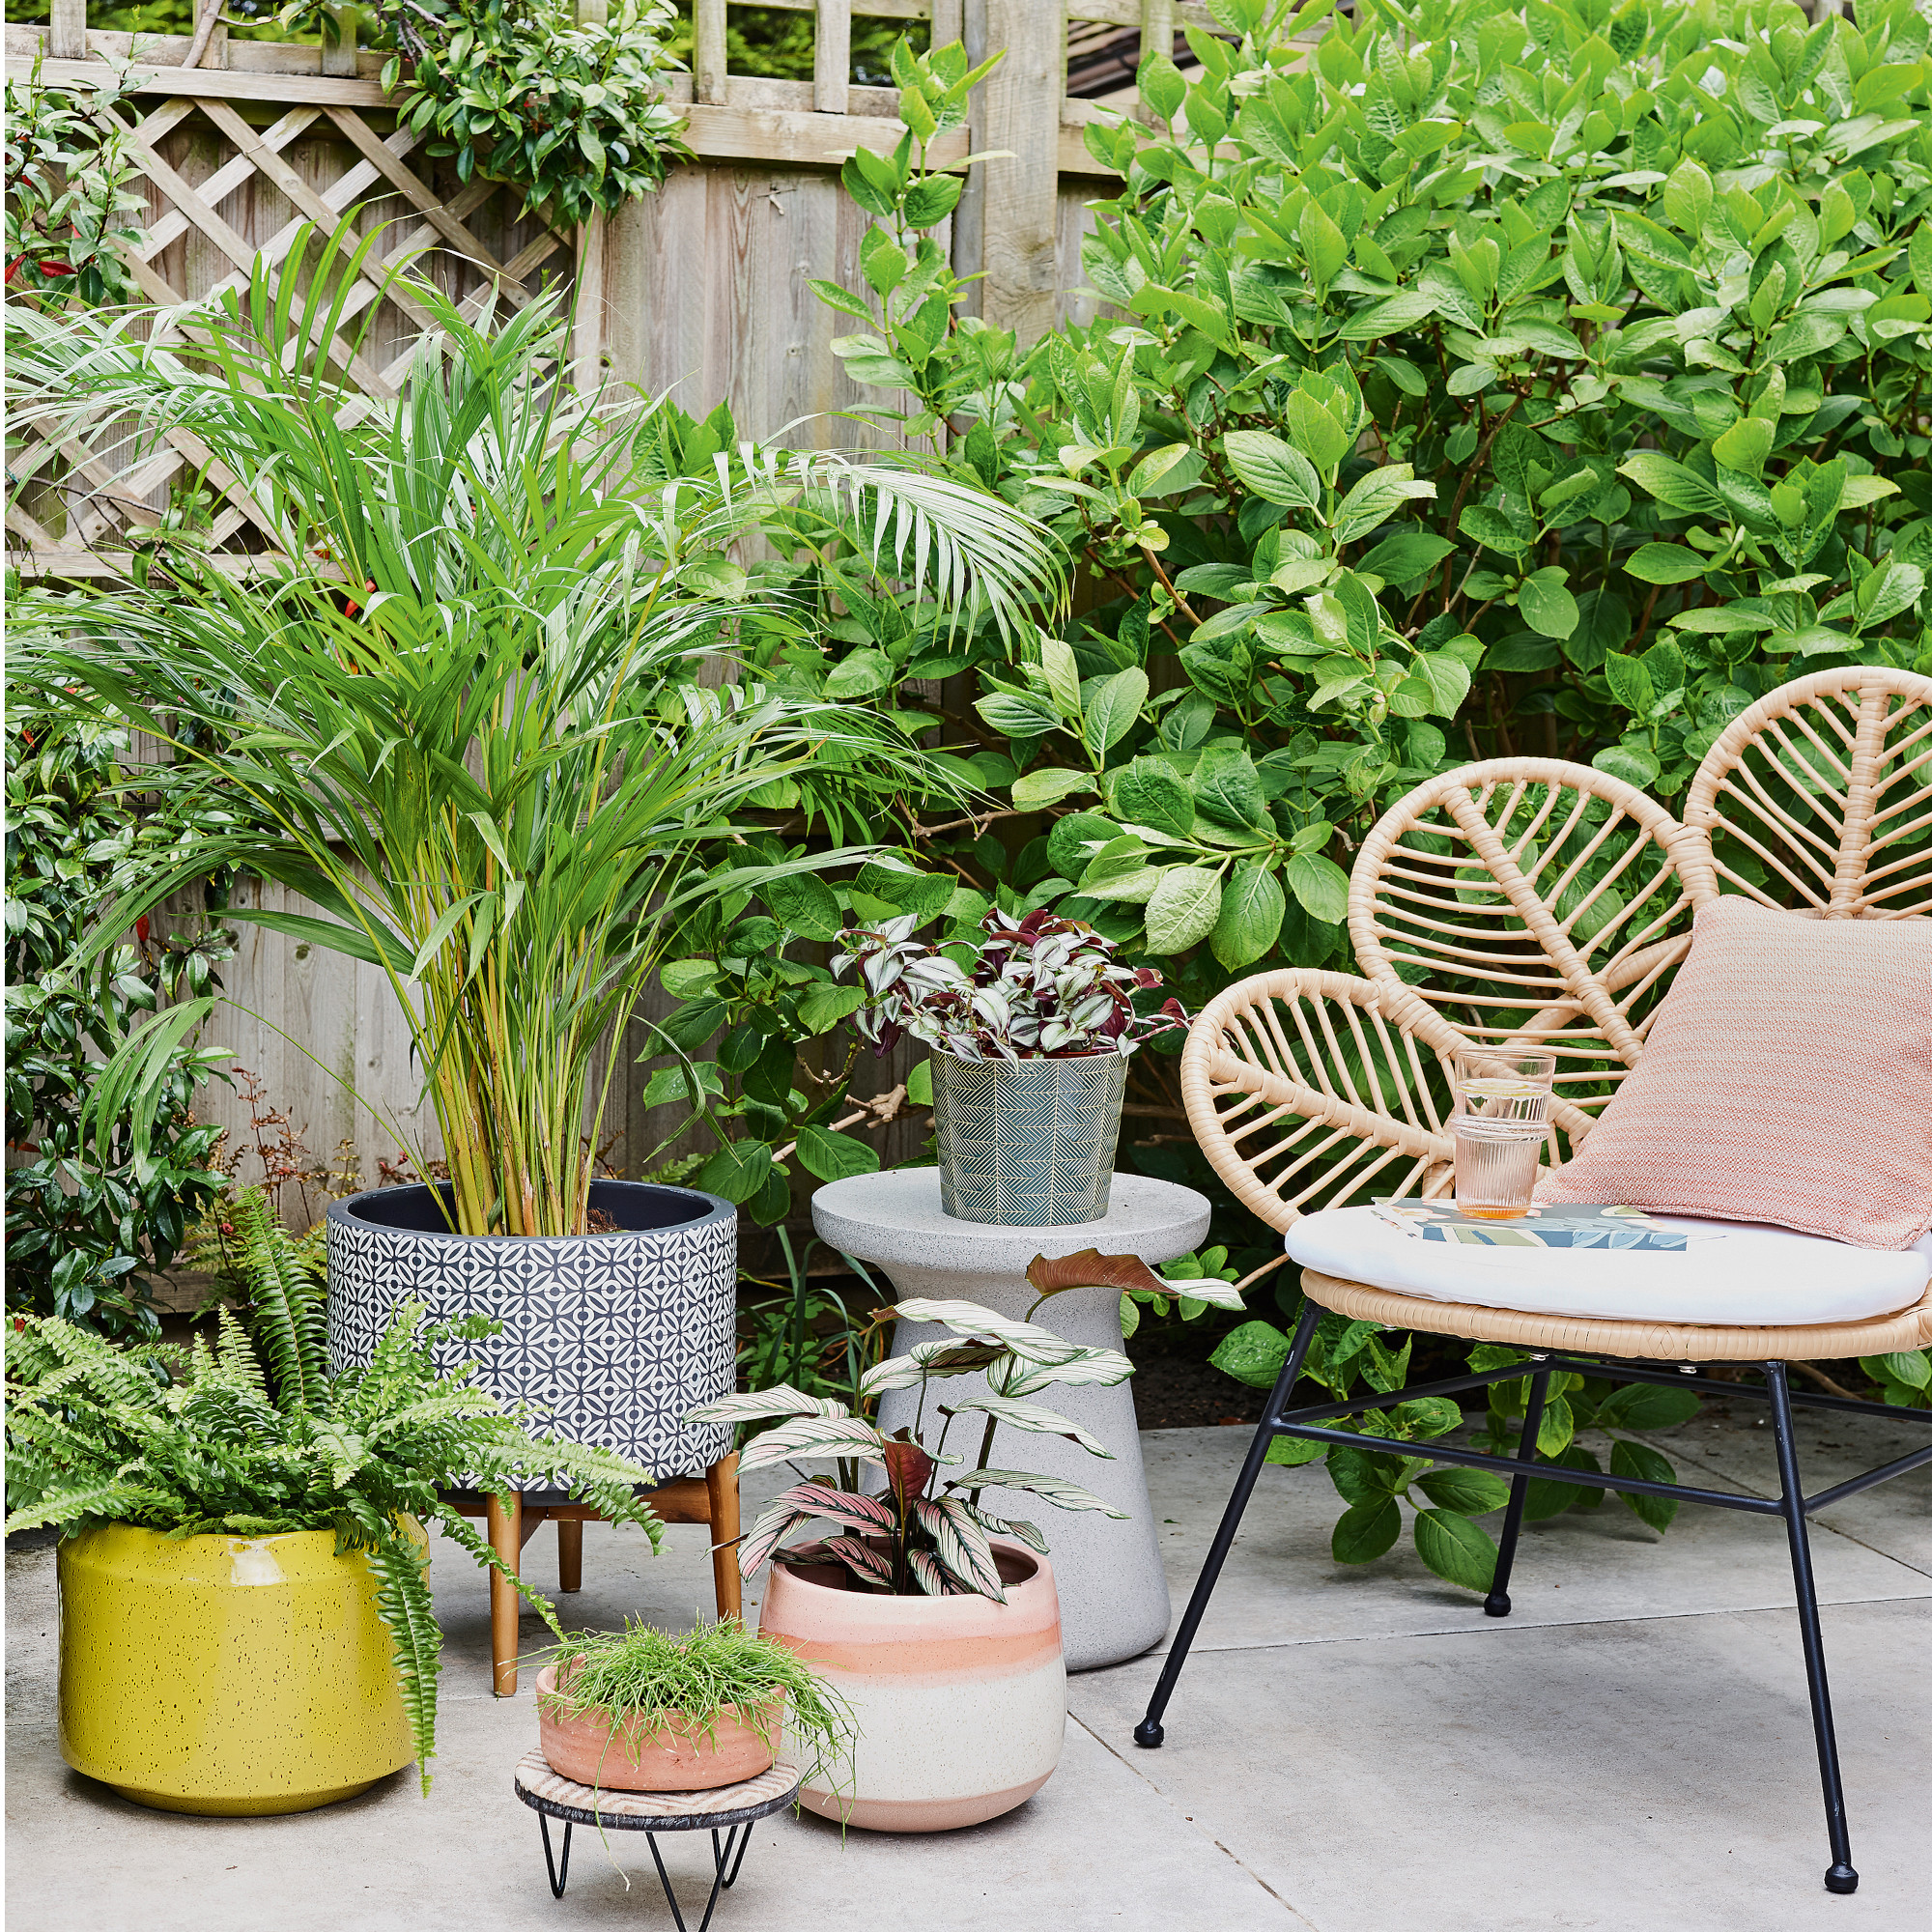 Courtyard garden with fence and shrubs, plants in pots and rattan chair with cushion